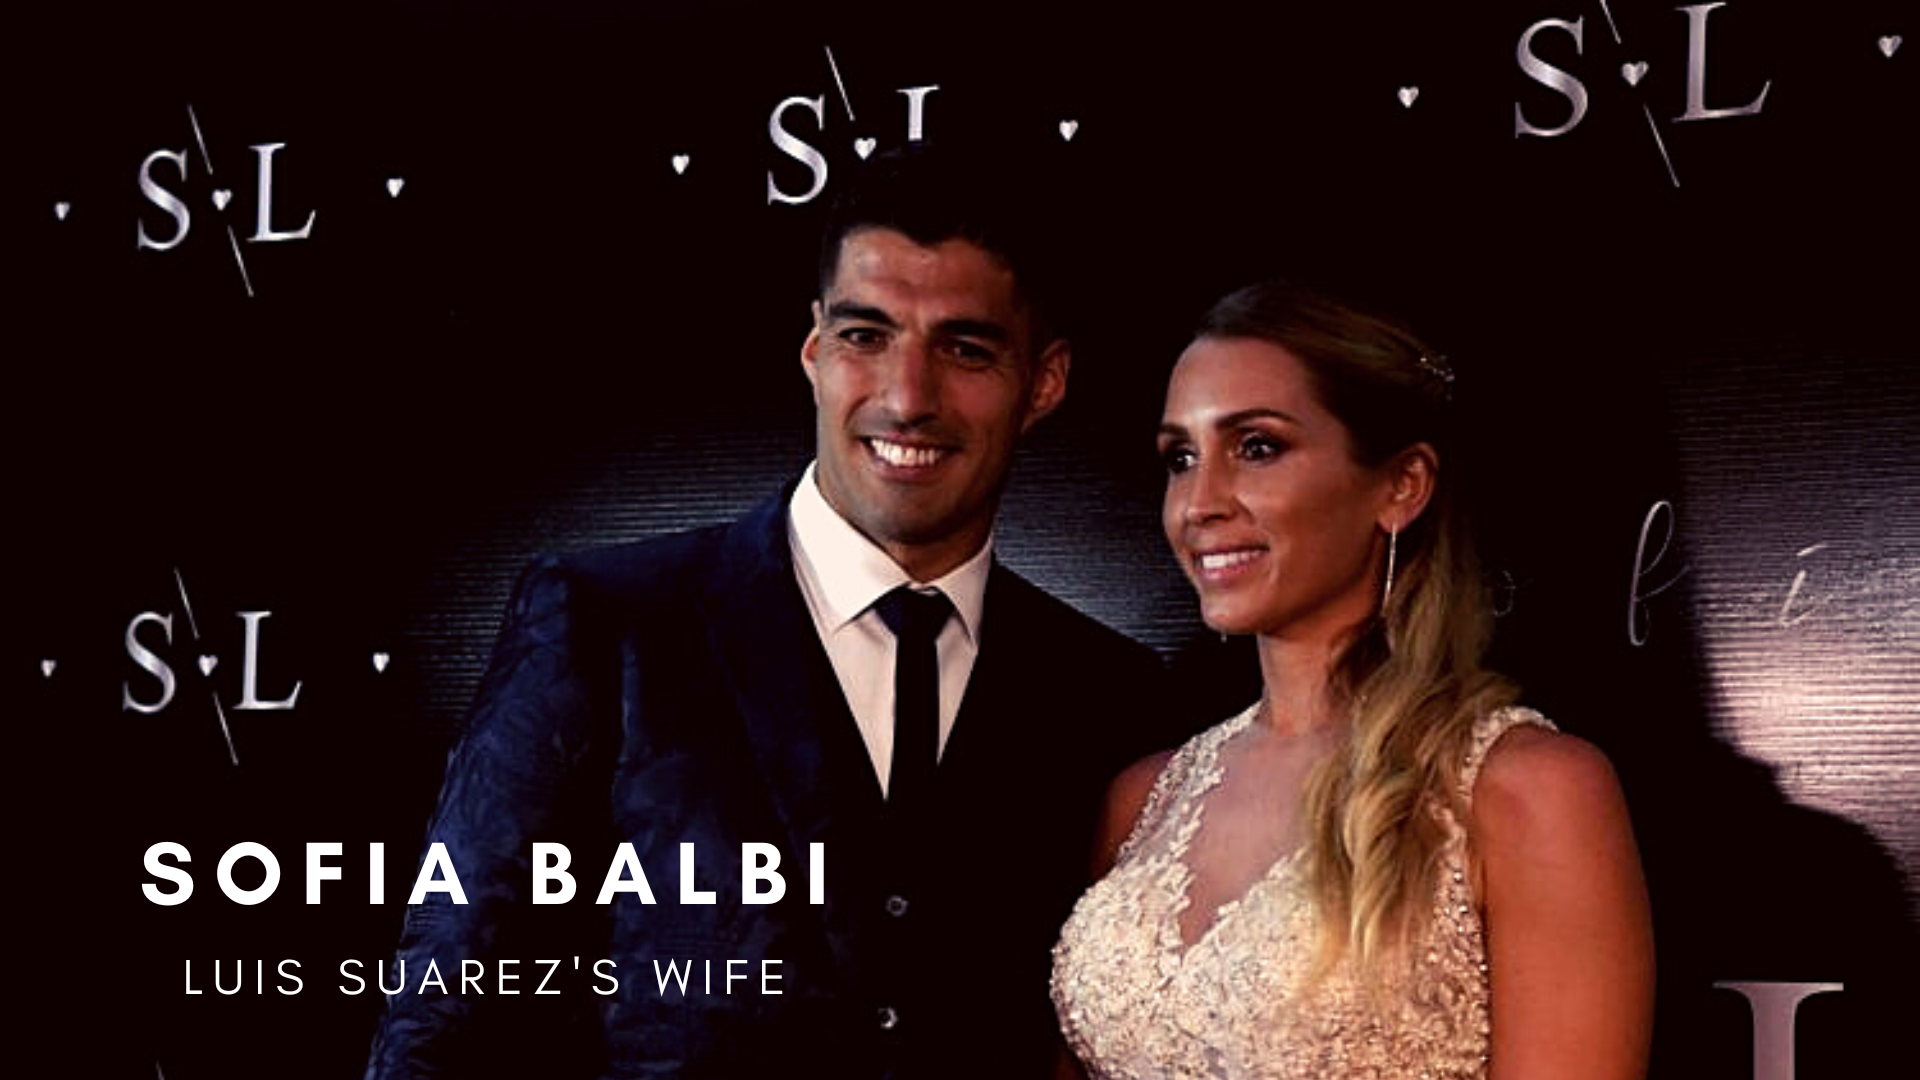 Luis Suarez with wife Sofia Balbi. (Credit: Getty Images)